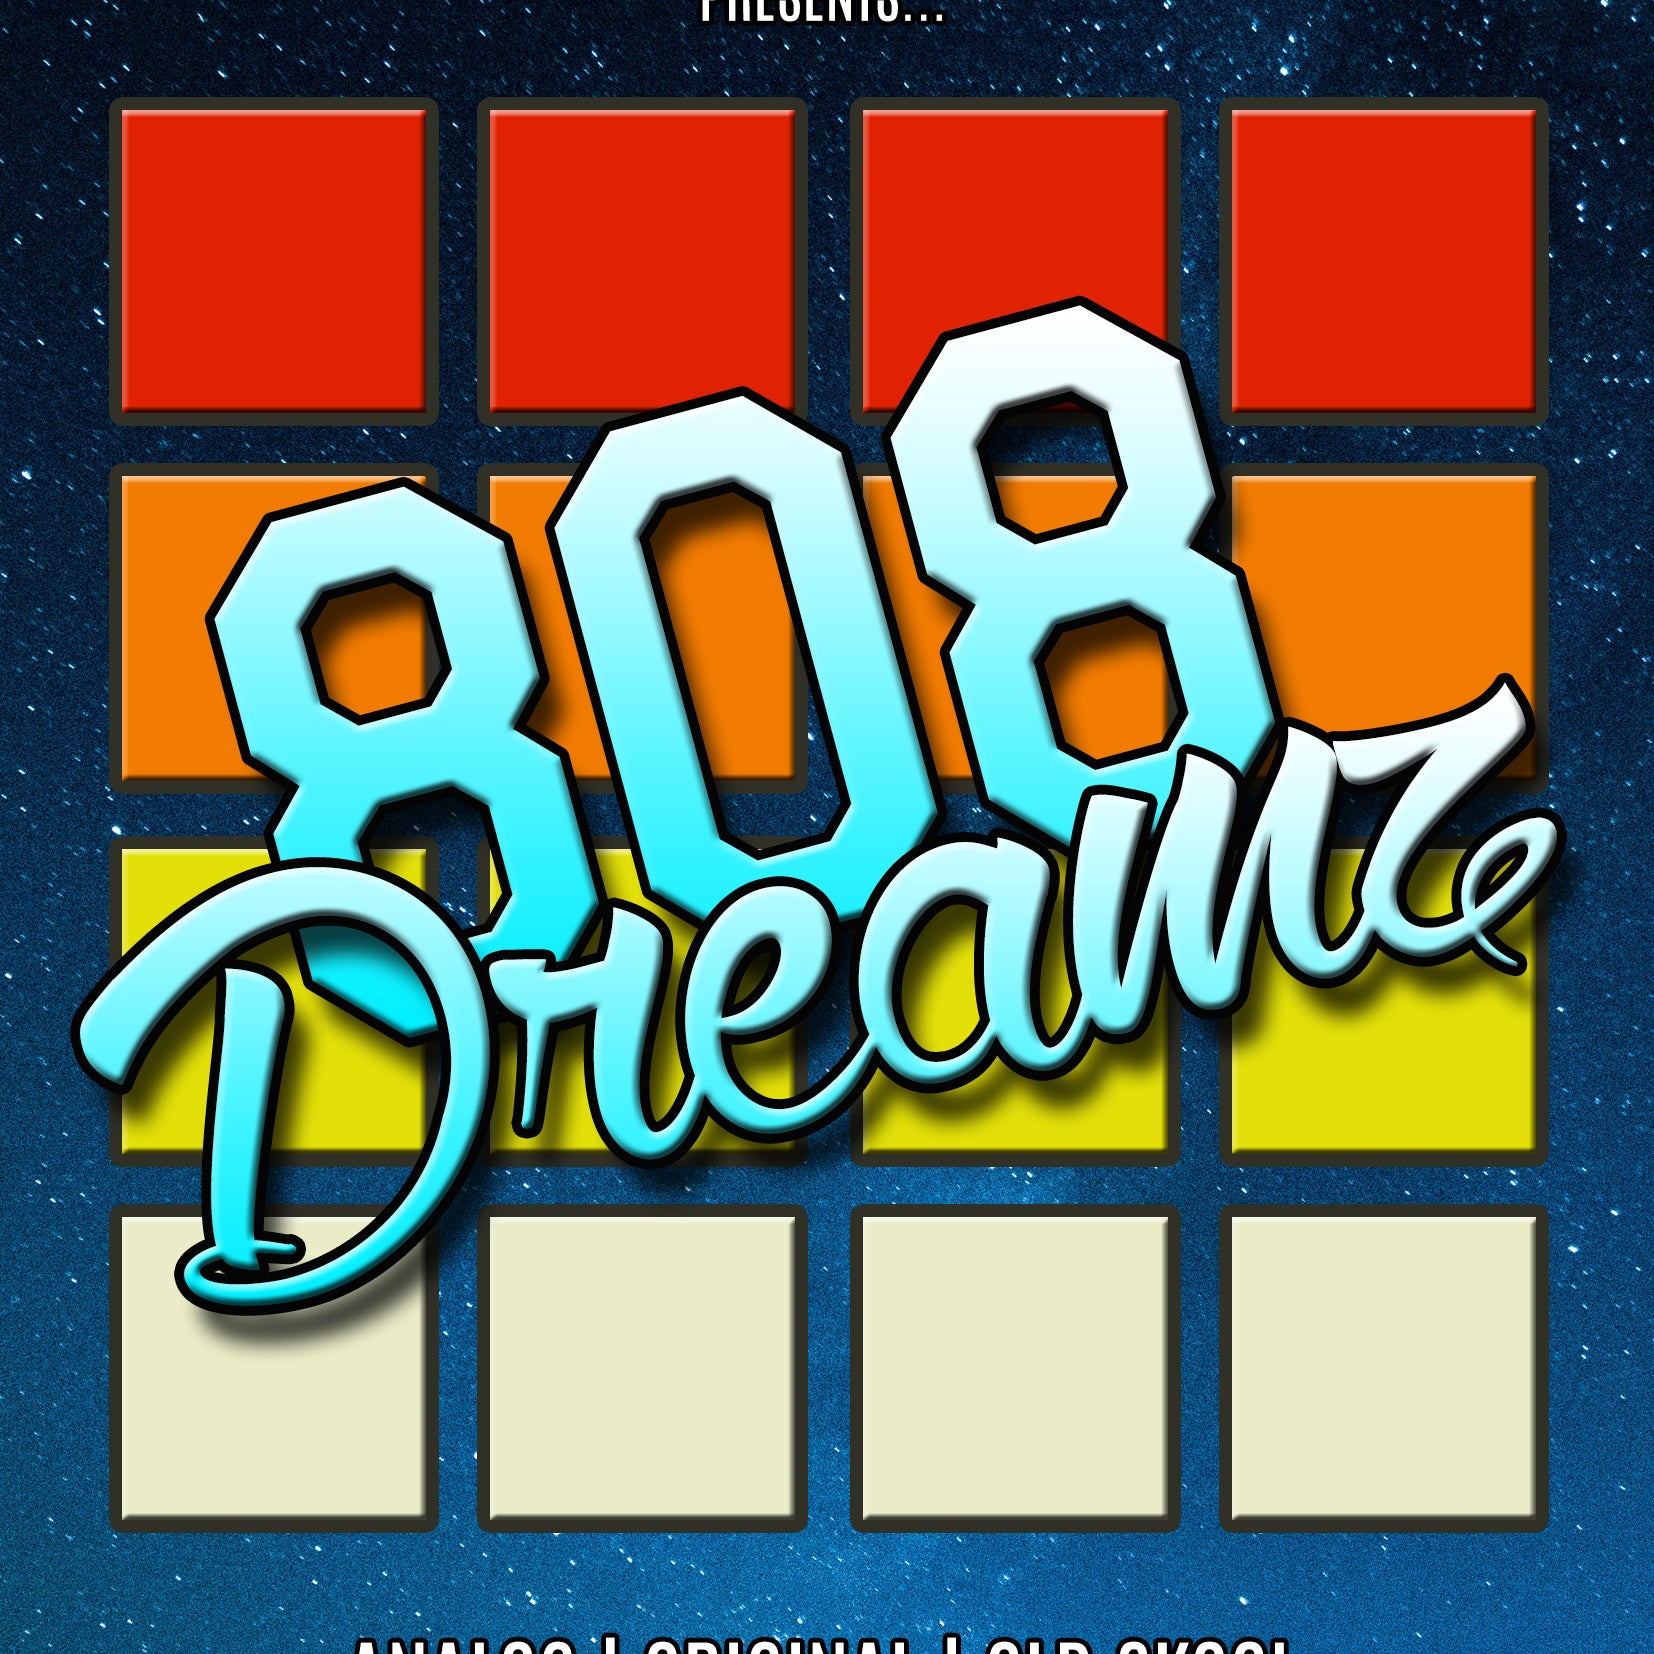 808 Dreamz is available now!